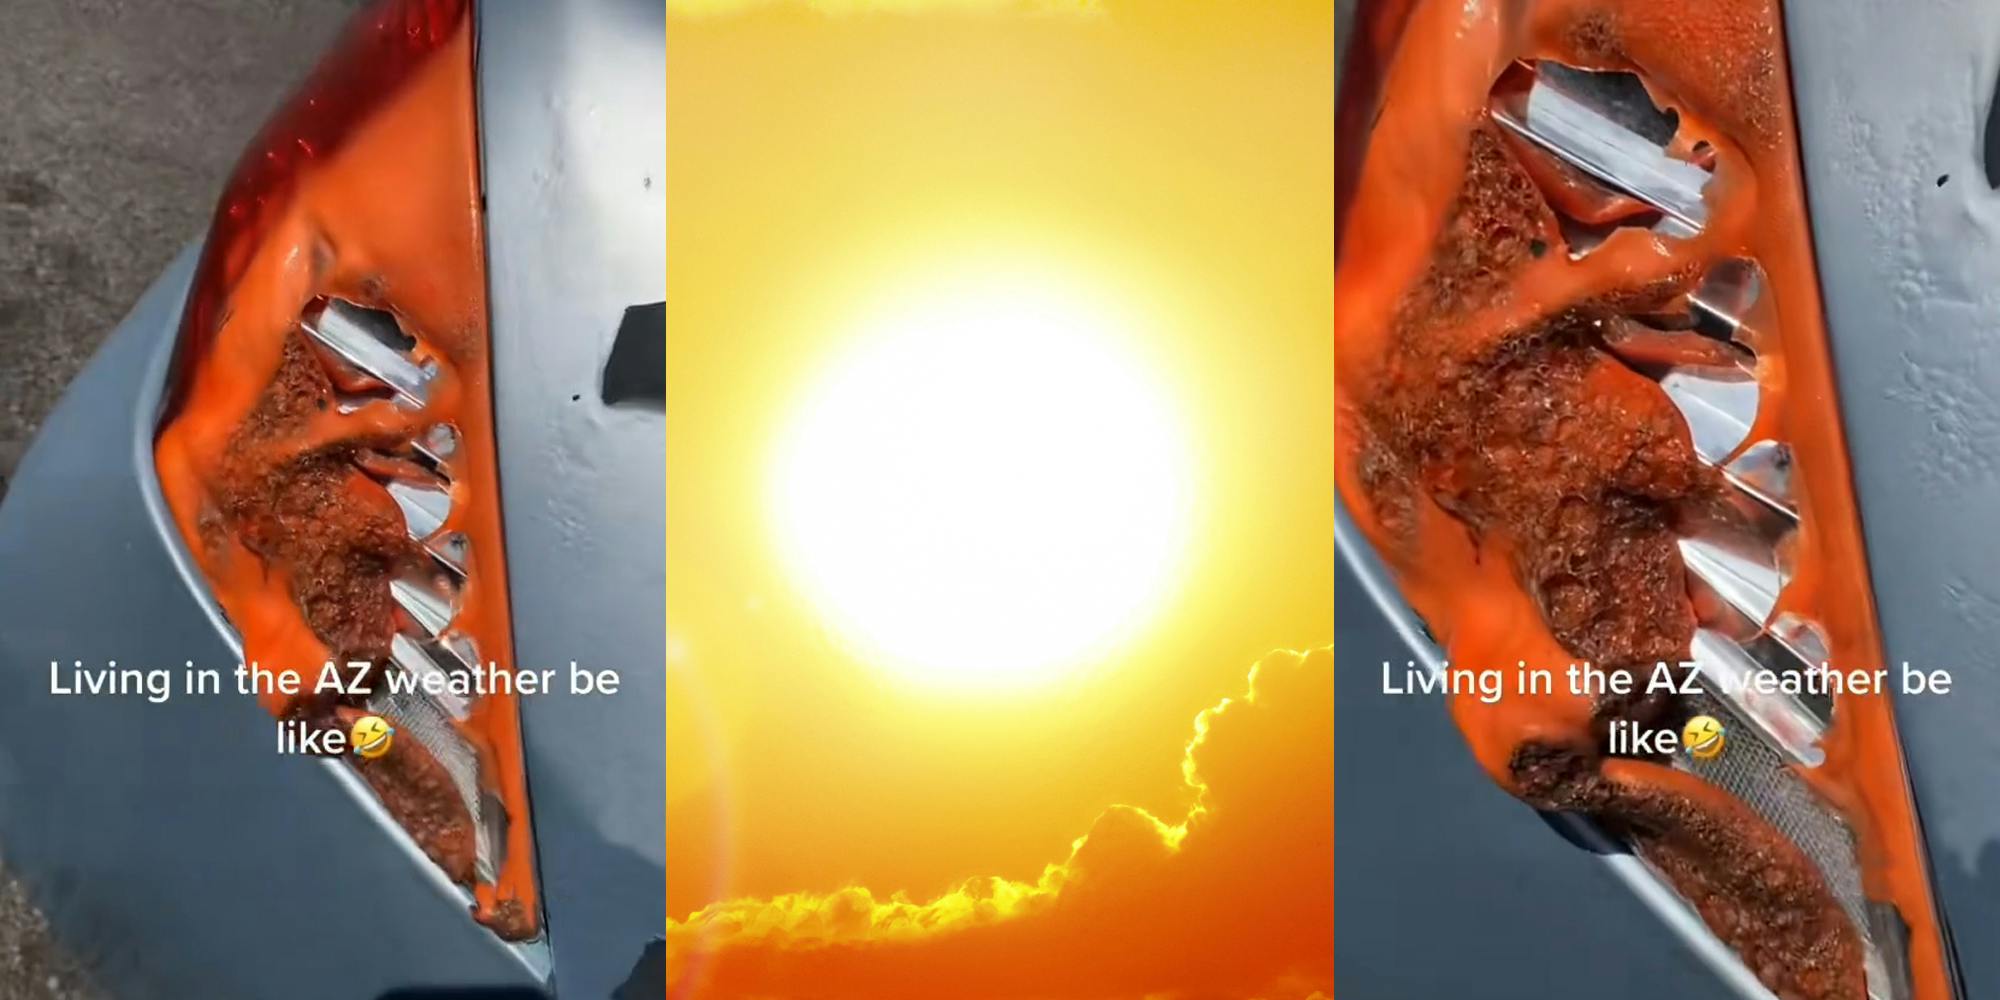 headlight melted with caption "Living in the AZ weather be like" (l) sun in sky (c) headlight melted up close with caption "Living in the AZ weather be like" (r)